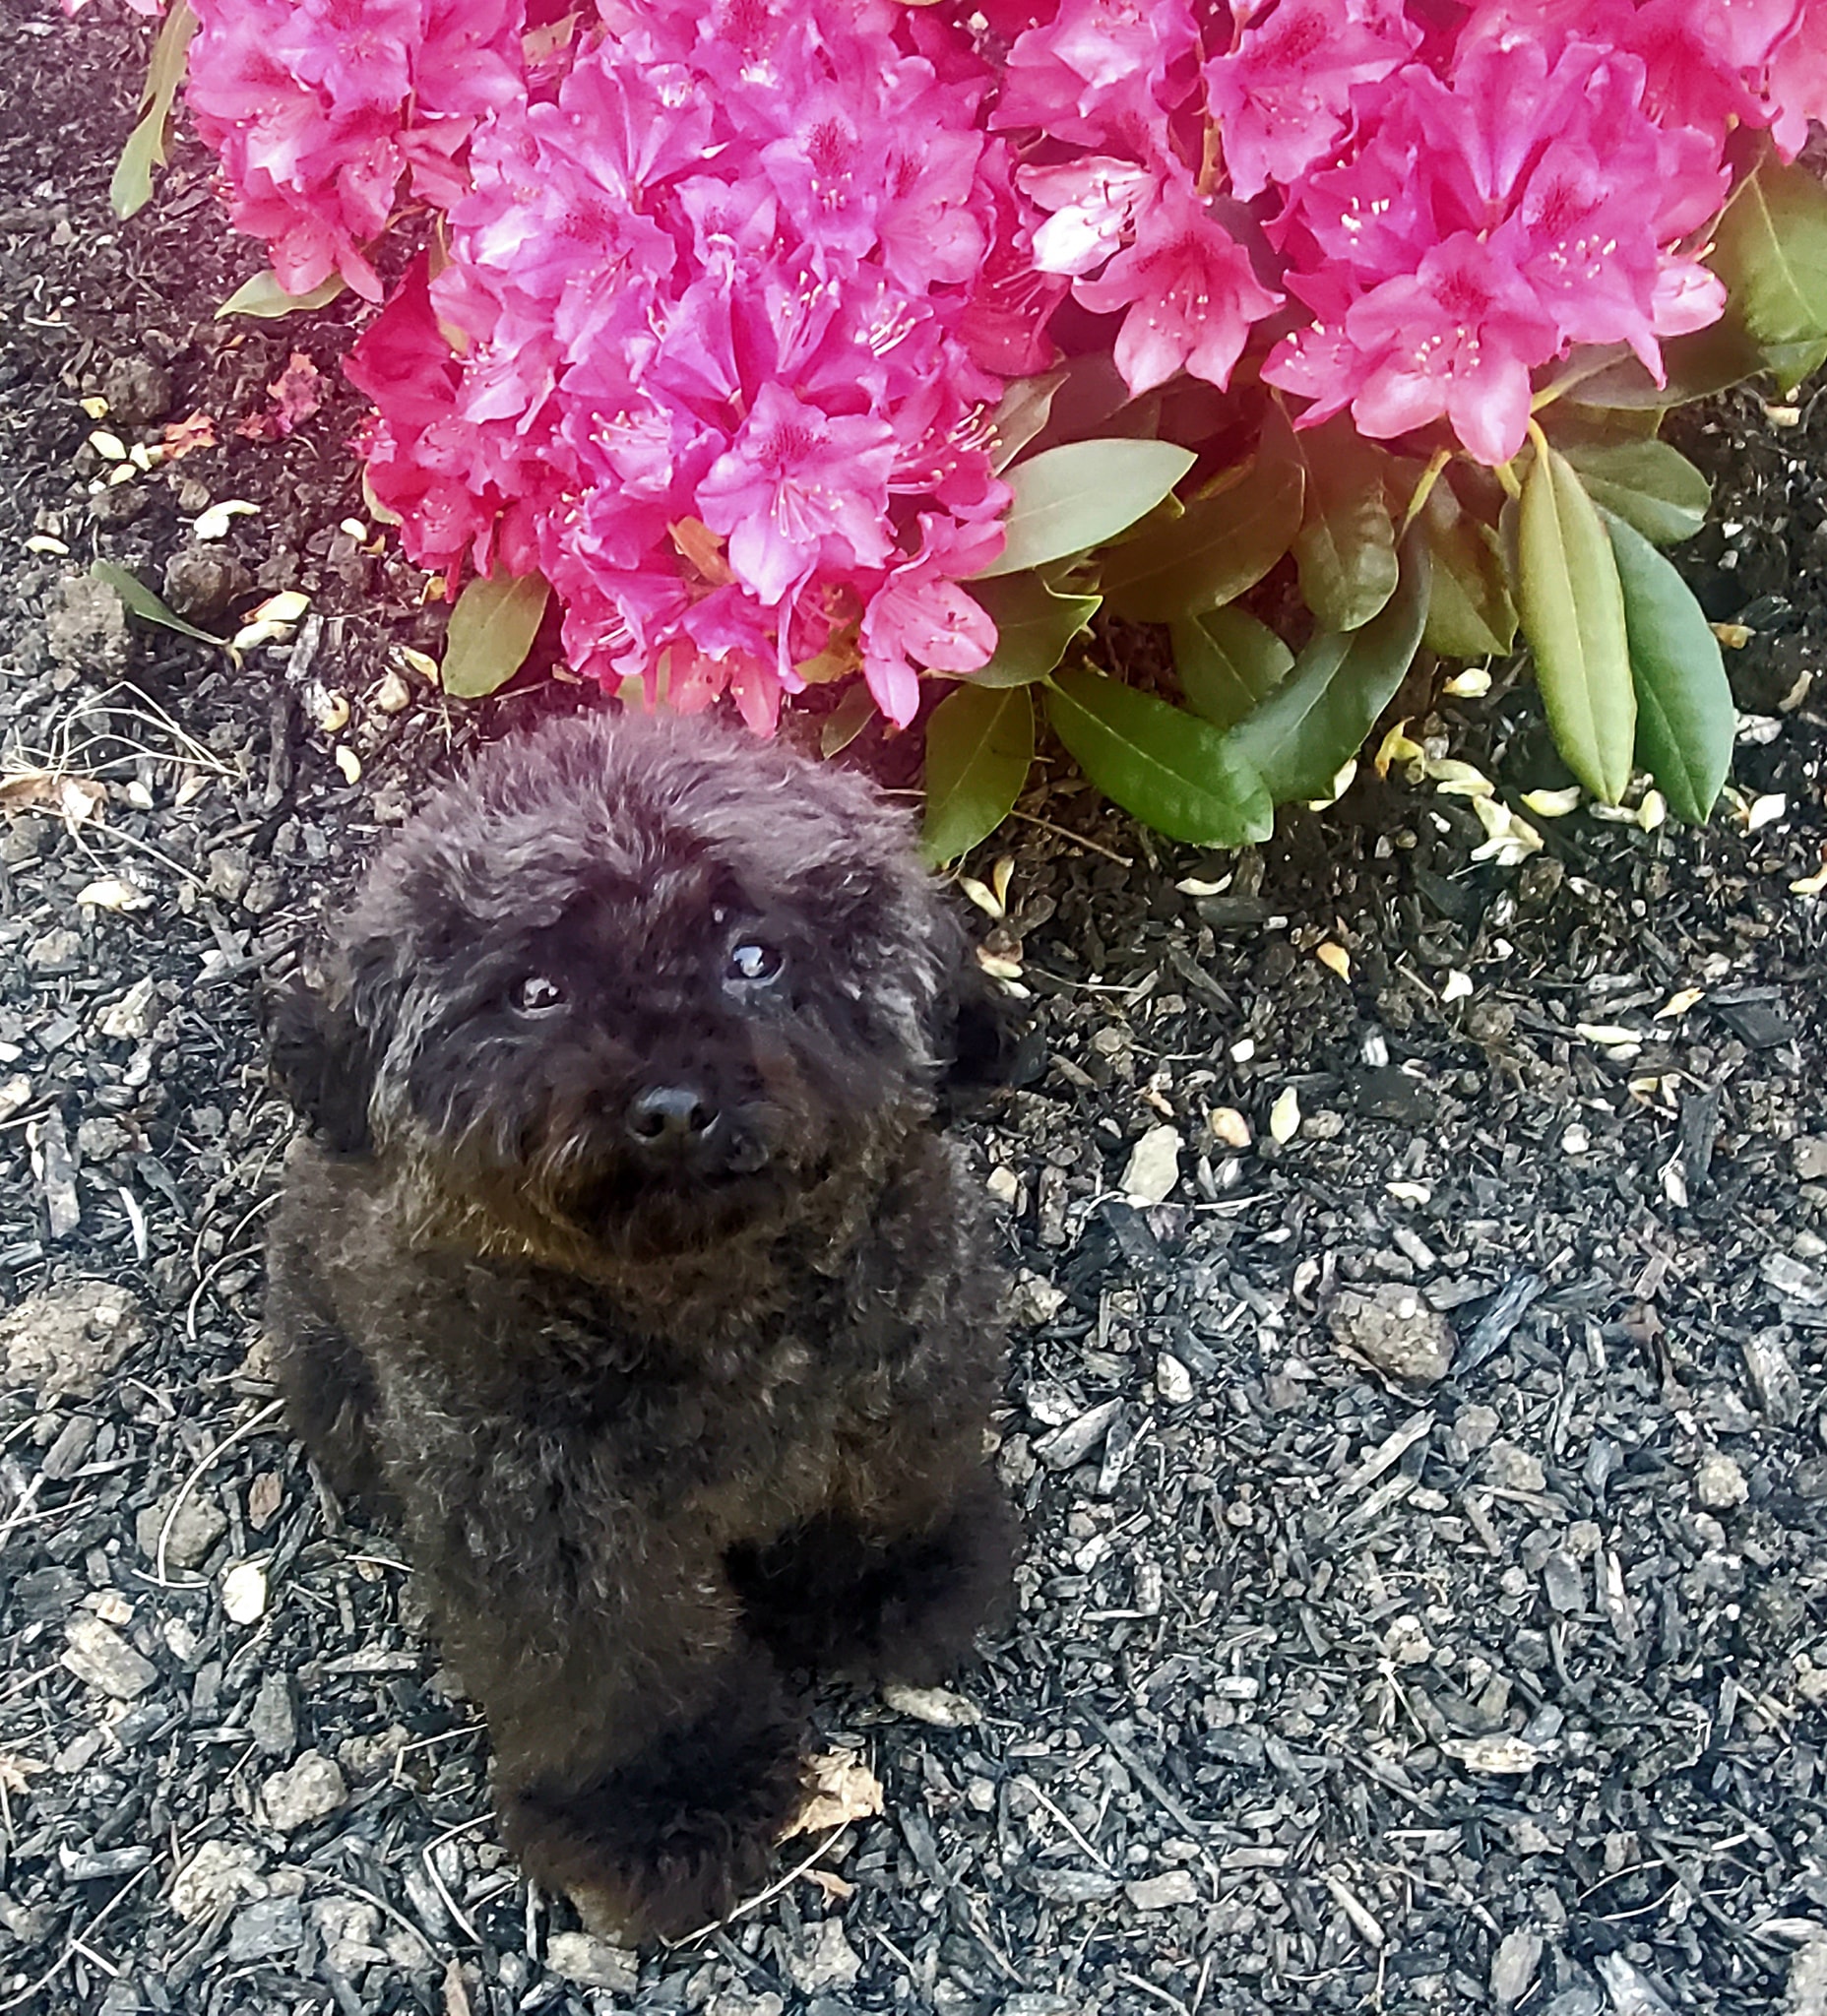 Gadget the dog sitting by a bush of pink flowers 